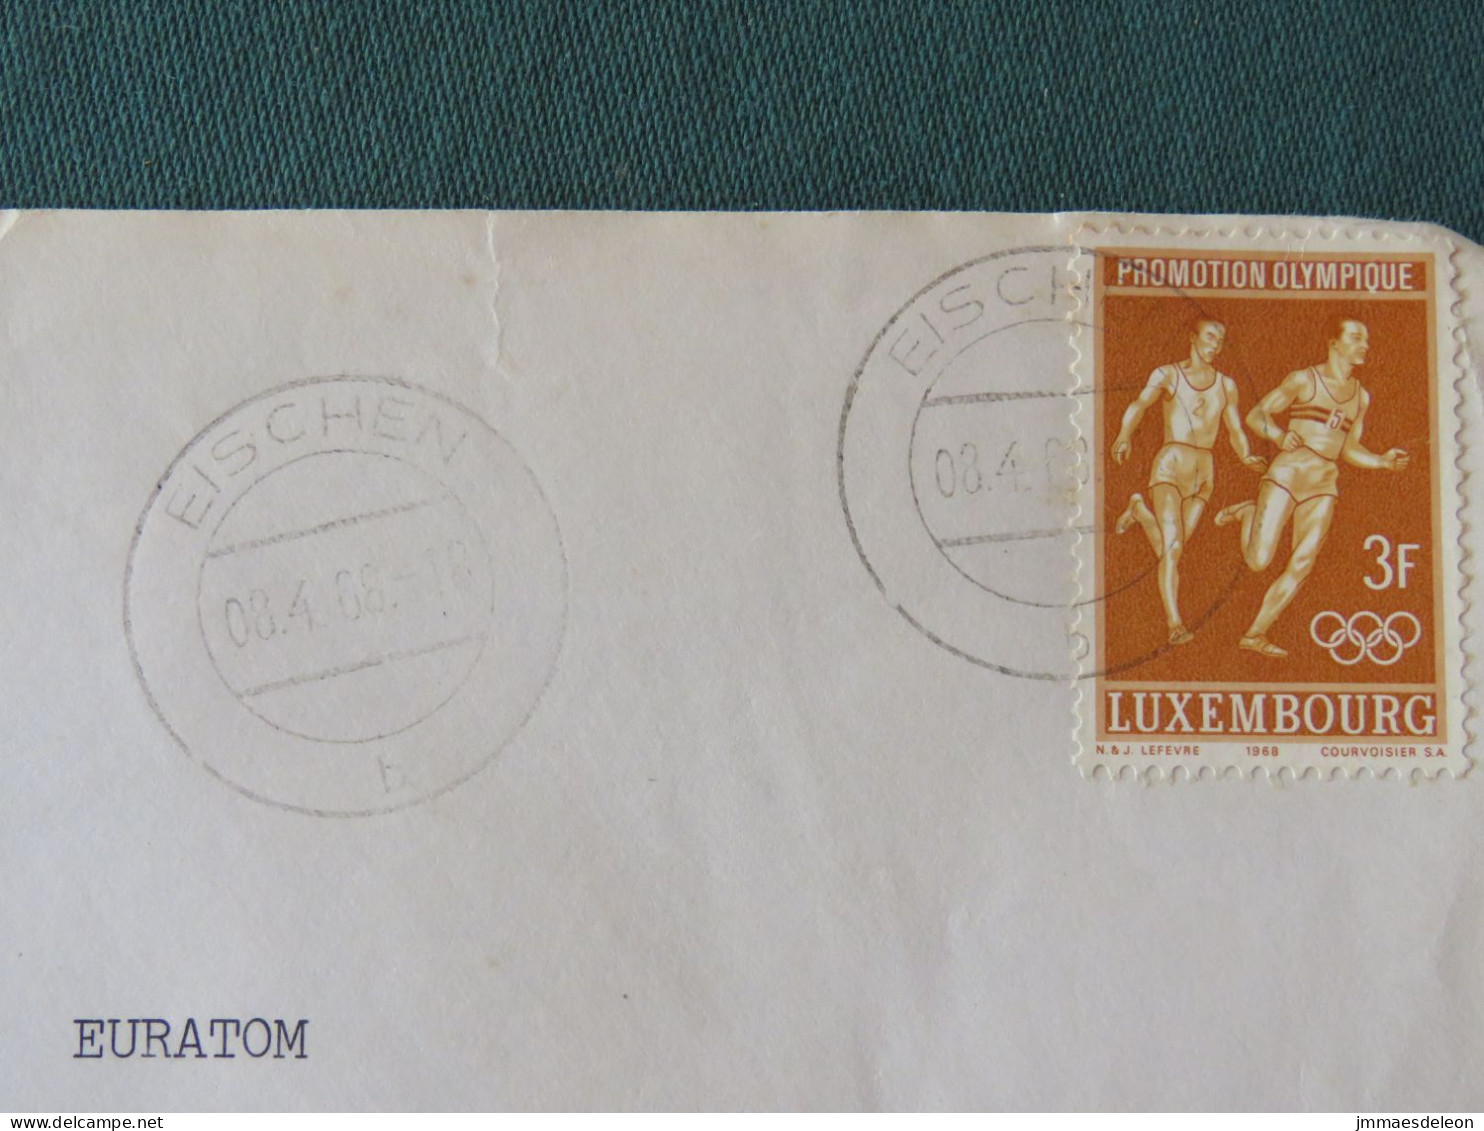 Luxembourg 1968 Cover To Belgium - Olympic Games Running - Covers & Documents